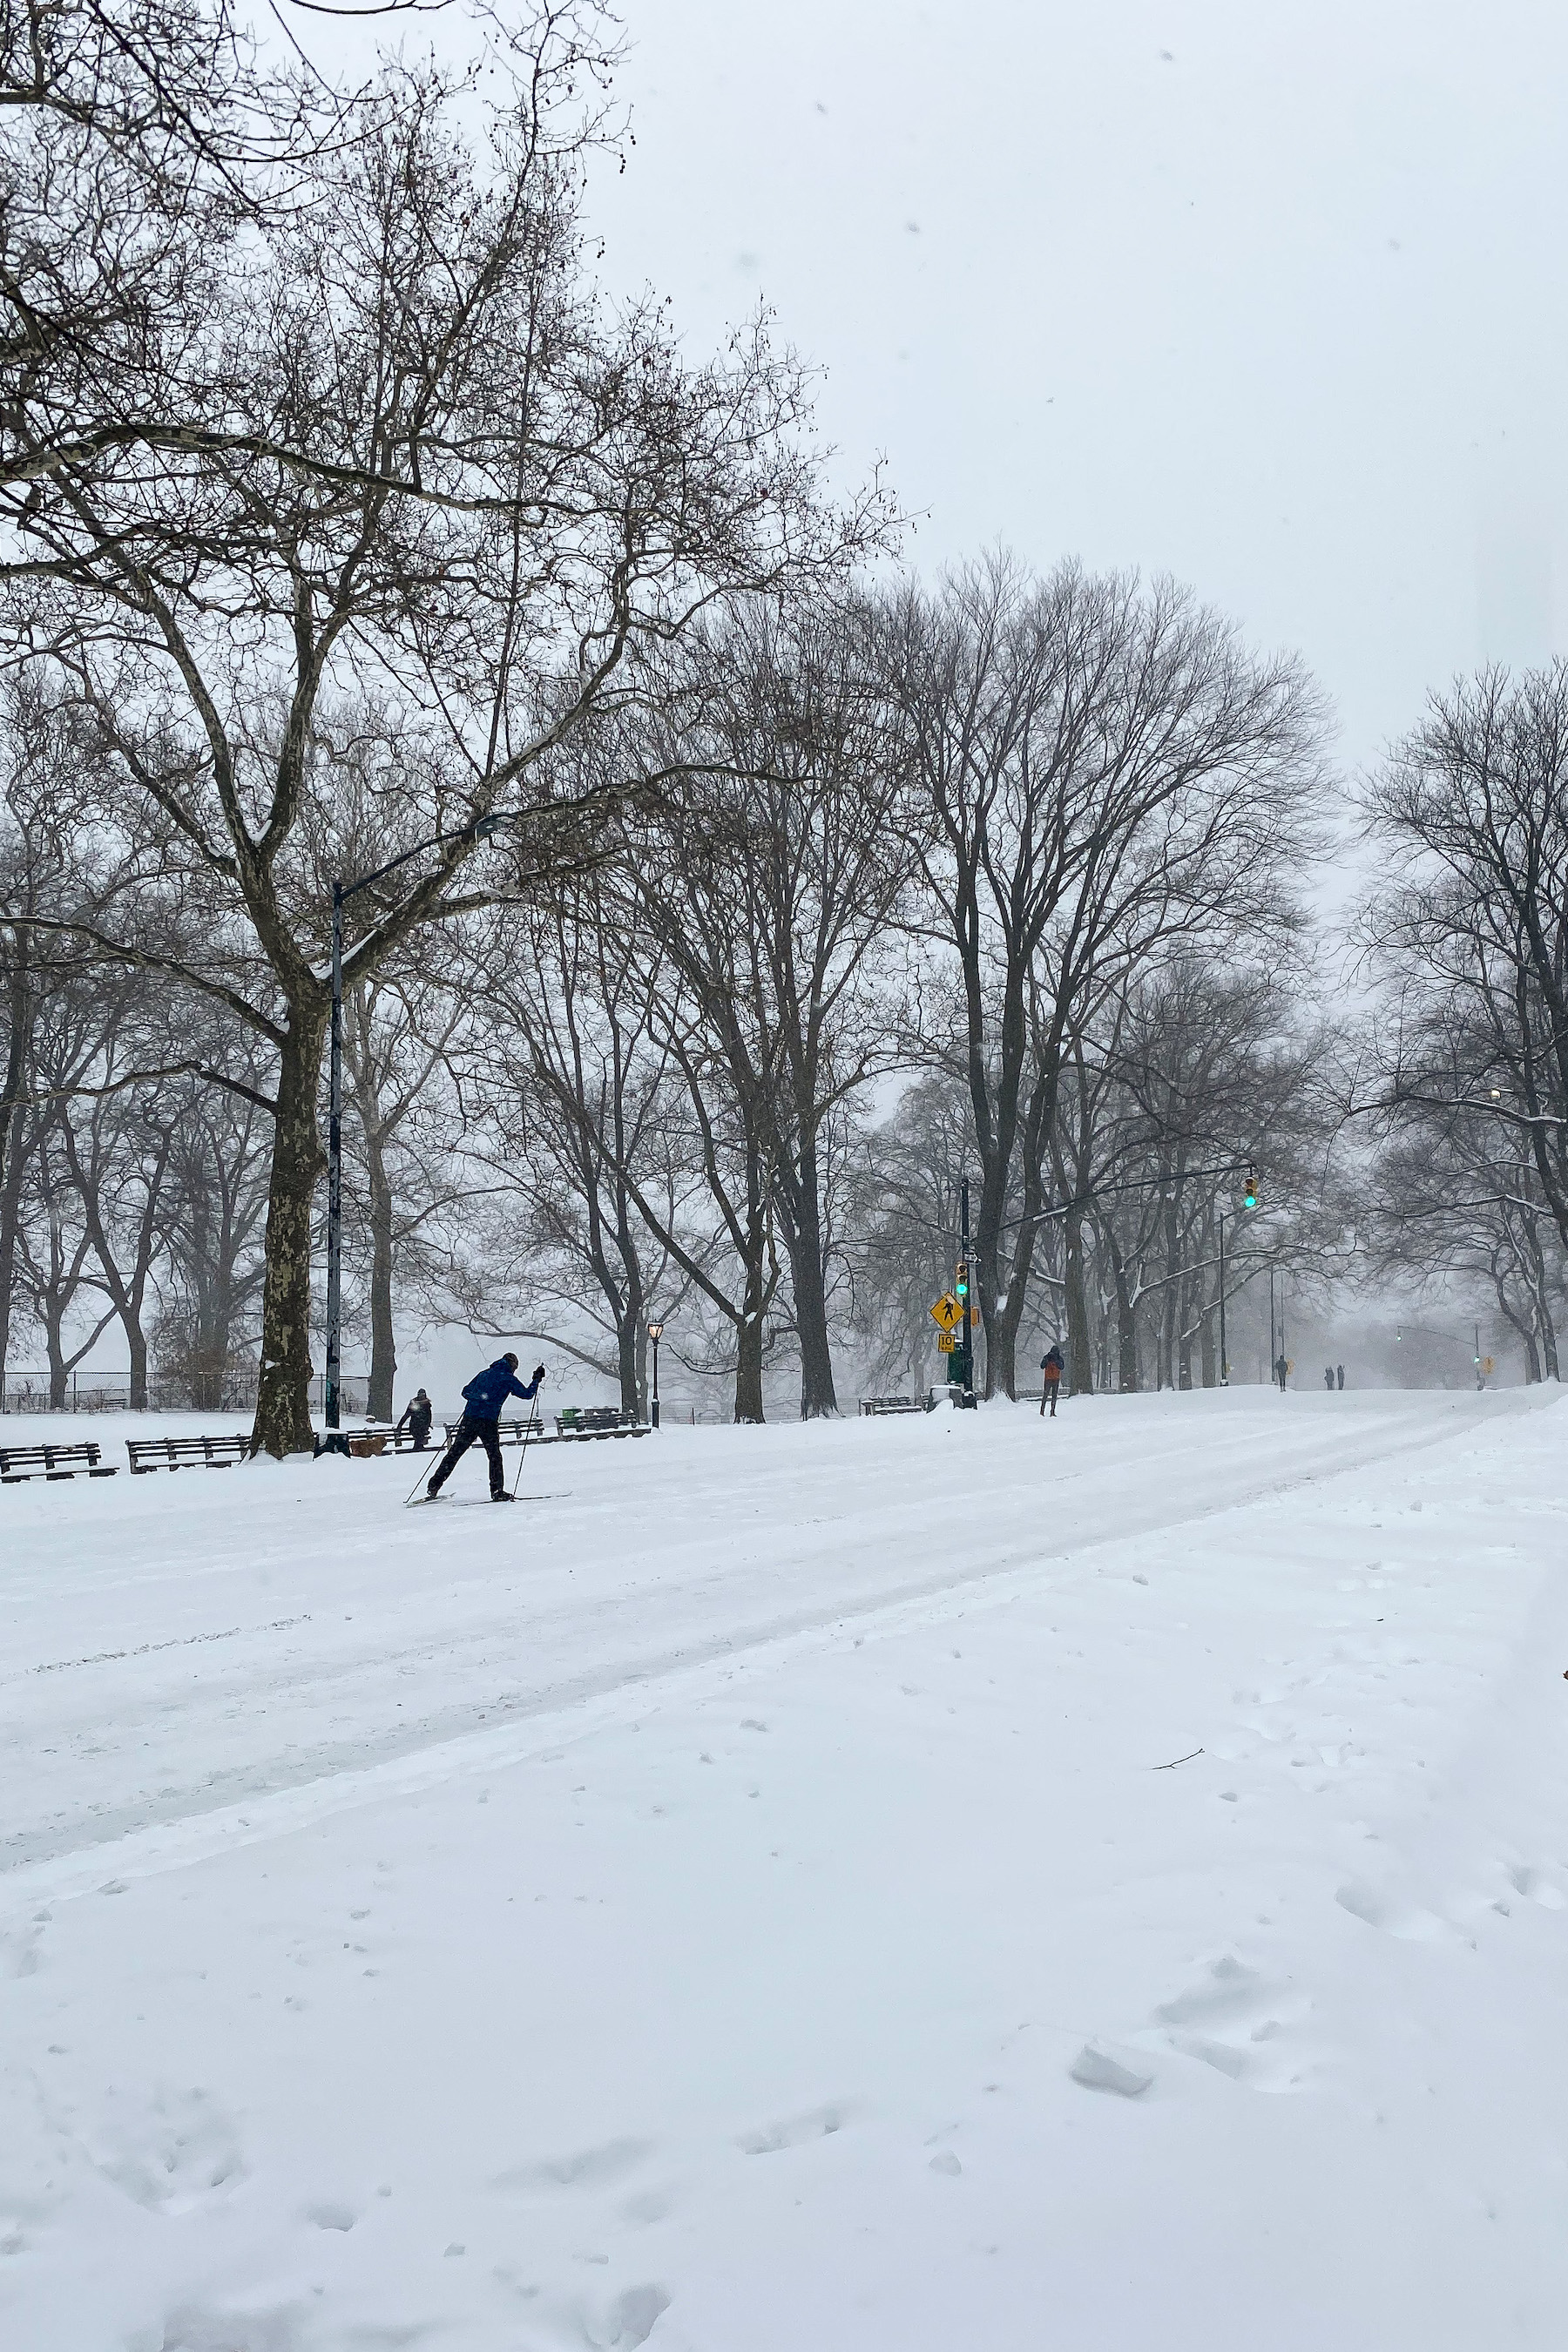 cross country skiers in Central Park | A Snow Day in New York City